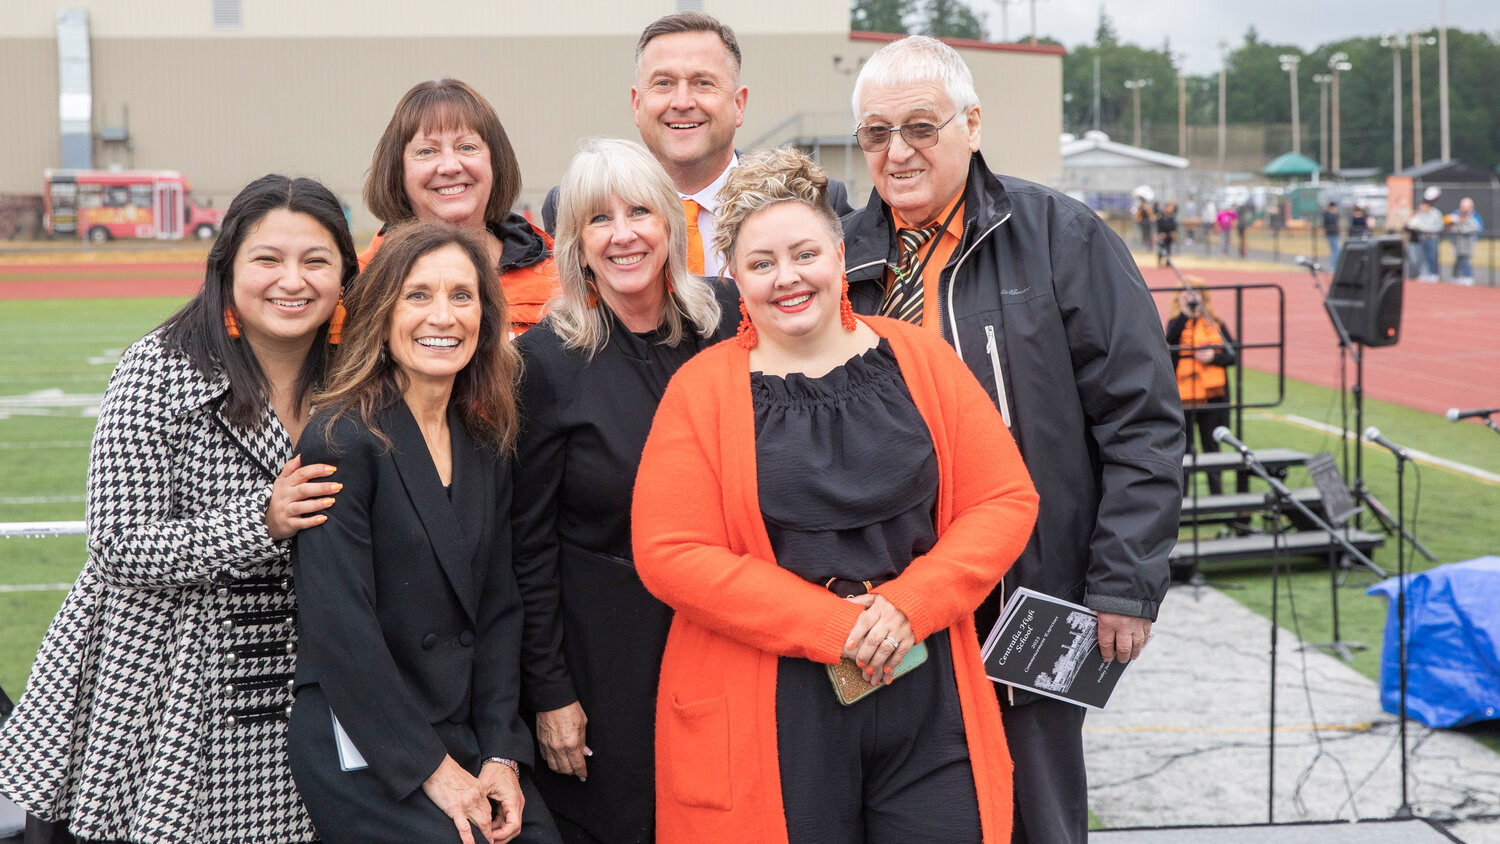 From left, Maritza Bravo, Superintendent Lisa Grant, Deb Parnham, Vickie Jackson, Centralia High School Principal Scot Embrey, Board Vice President Mandi McDougall and Board President Tim Browning pose for a photo during a graduation ceremony in June 2023 at Tiger Stadium.